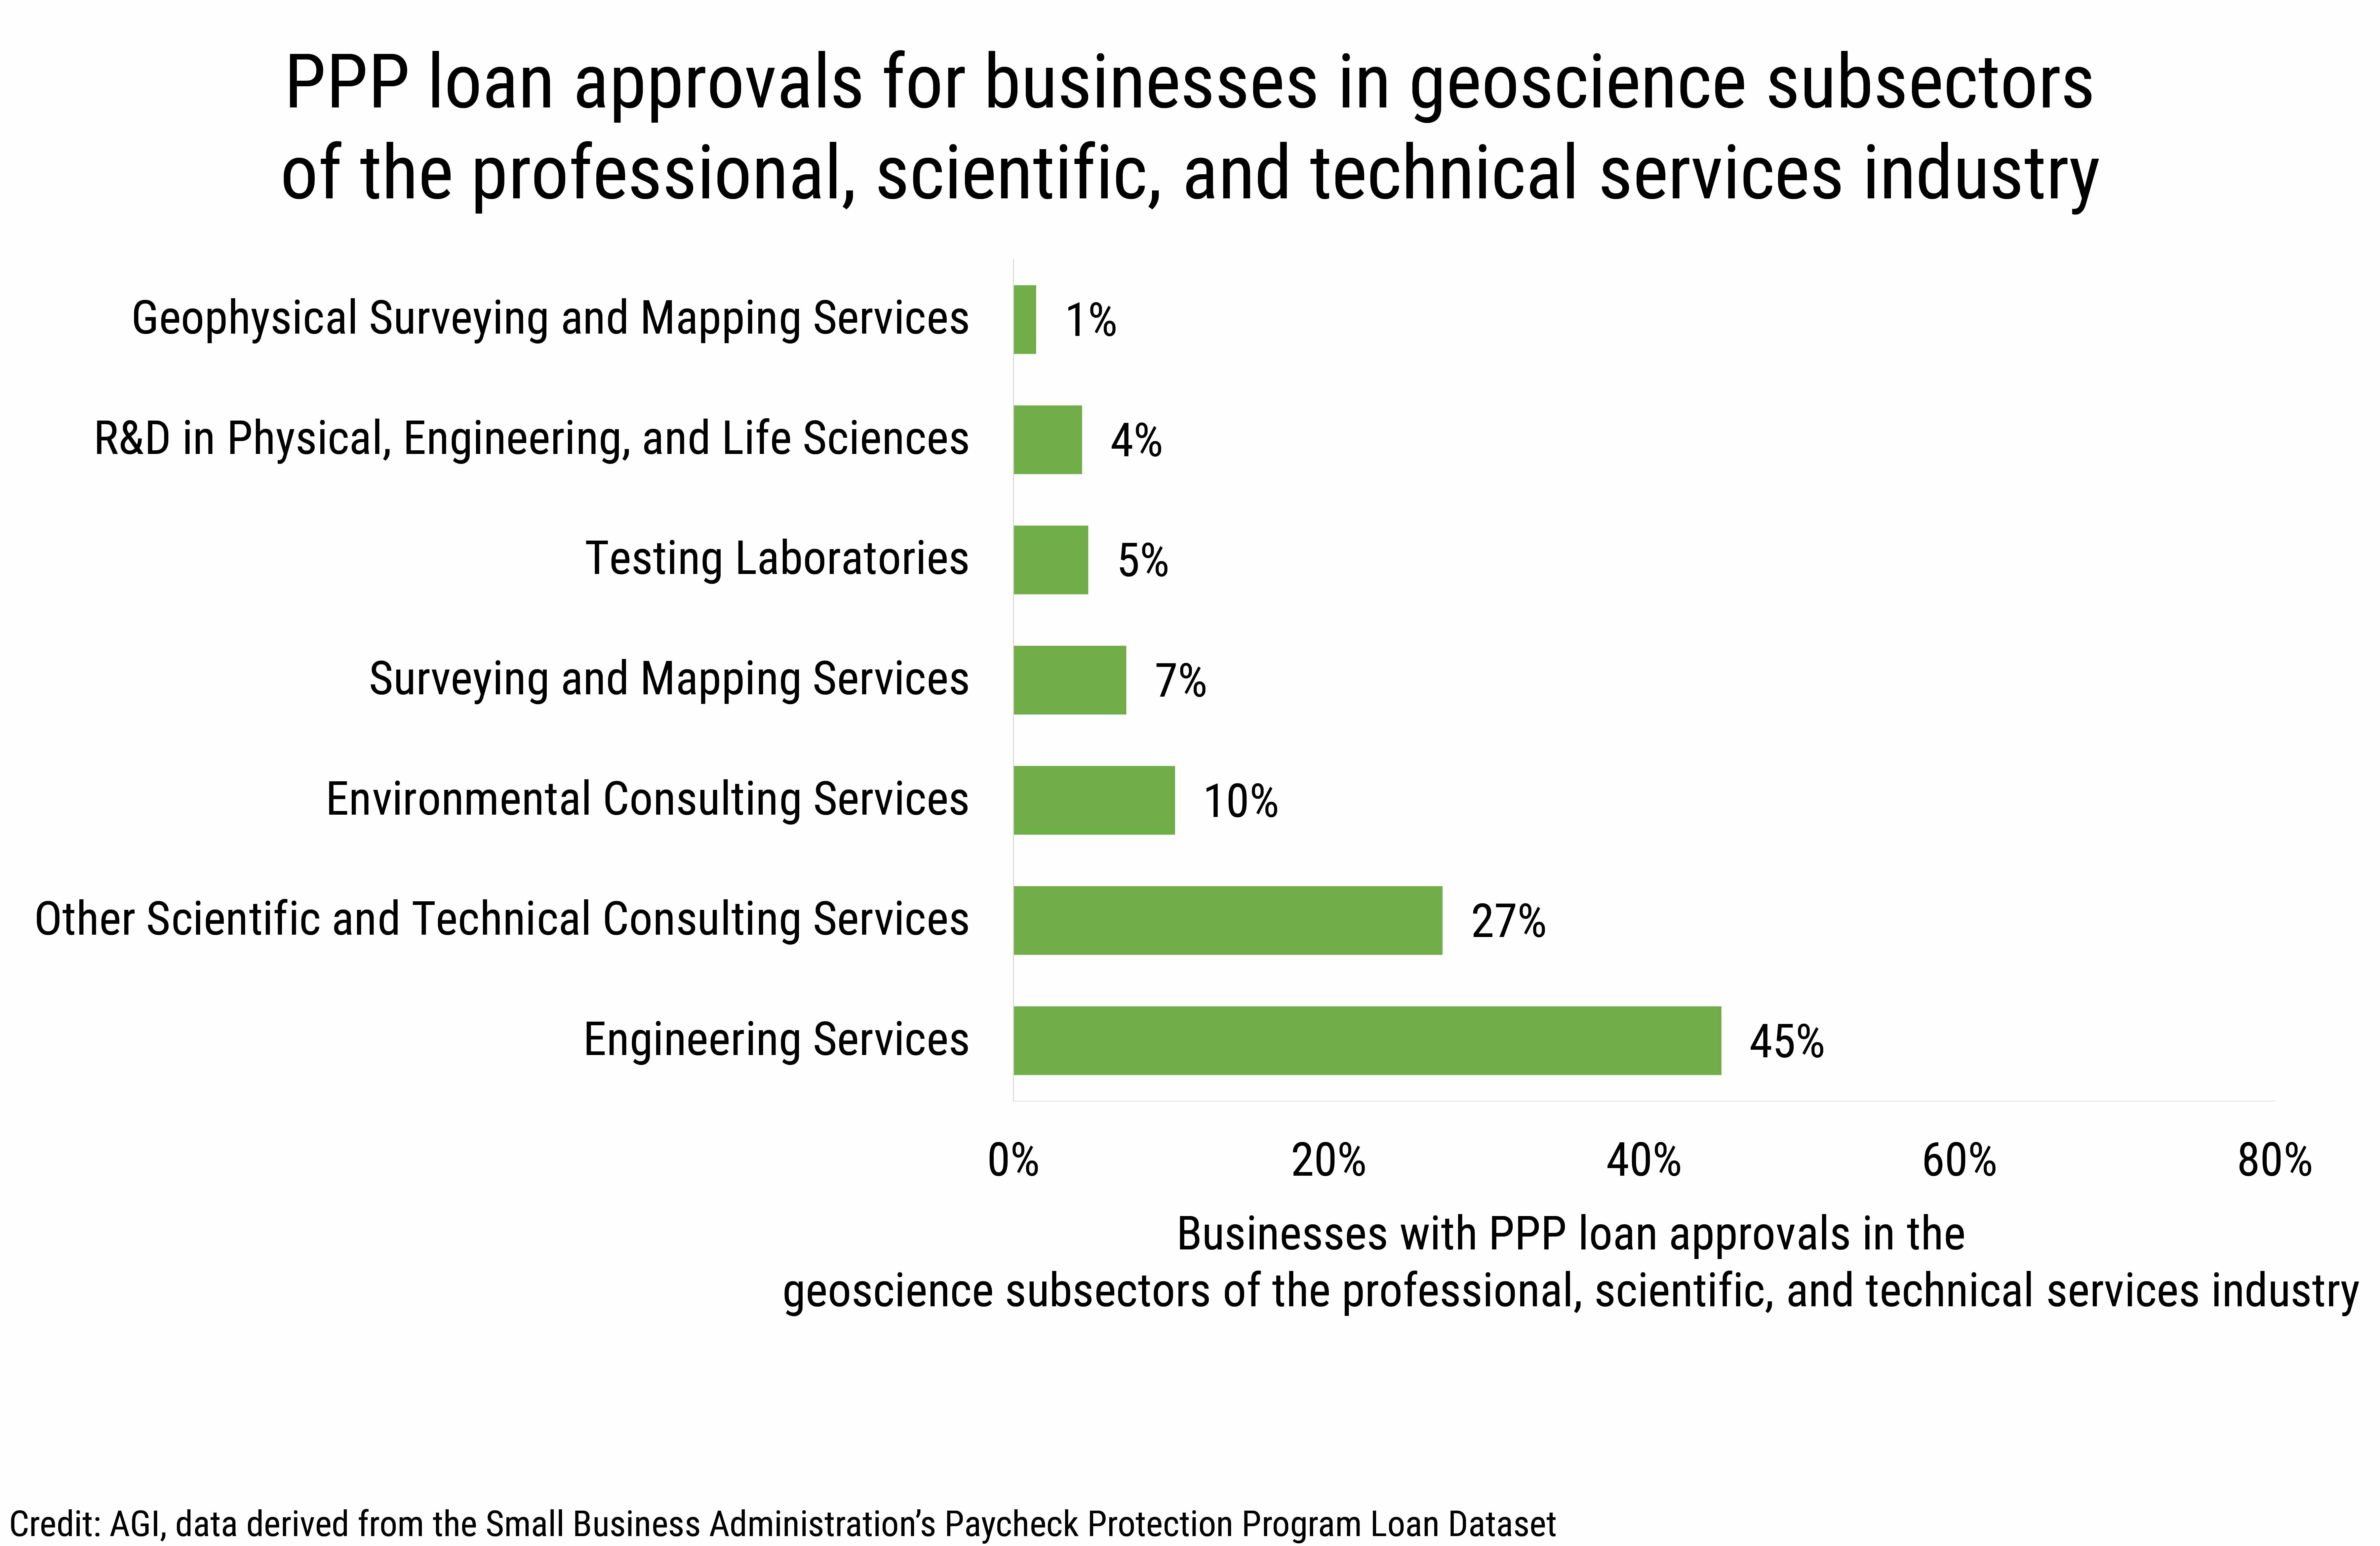 DB_2020-017 chart 02: PPP loan approvals for businesses in geoscience subsectors of the professional, scientific, and technical services industry. (credit: AGI, data derived from the SBA&#039;s Paycheck Protection Program Loan Dataset